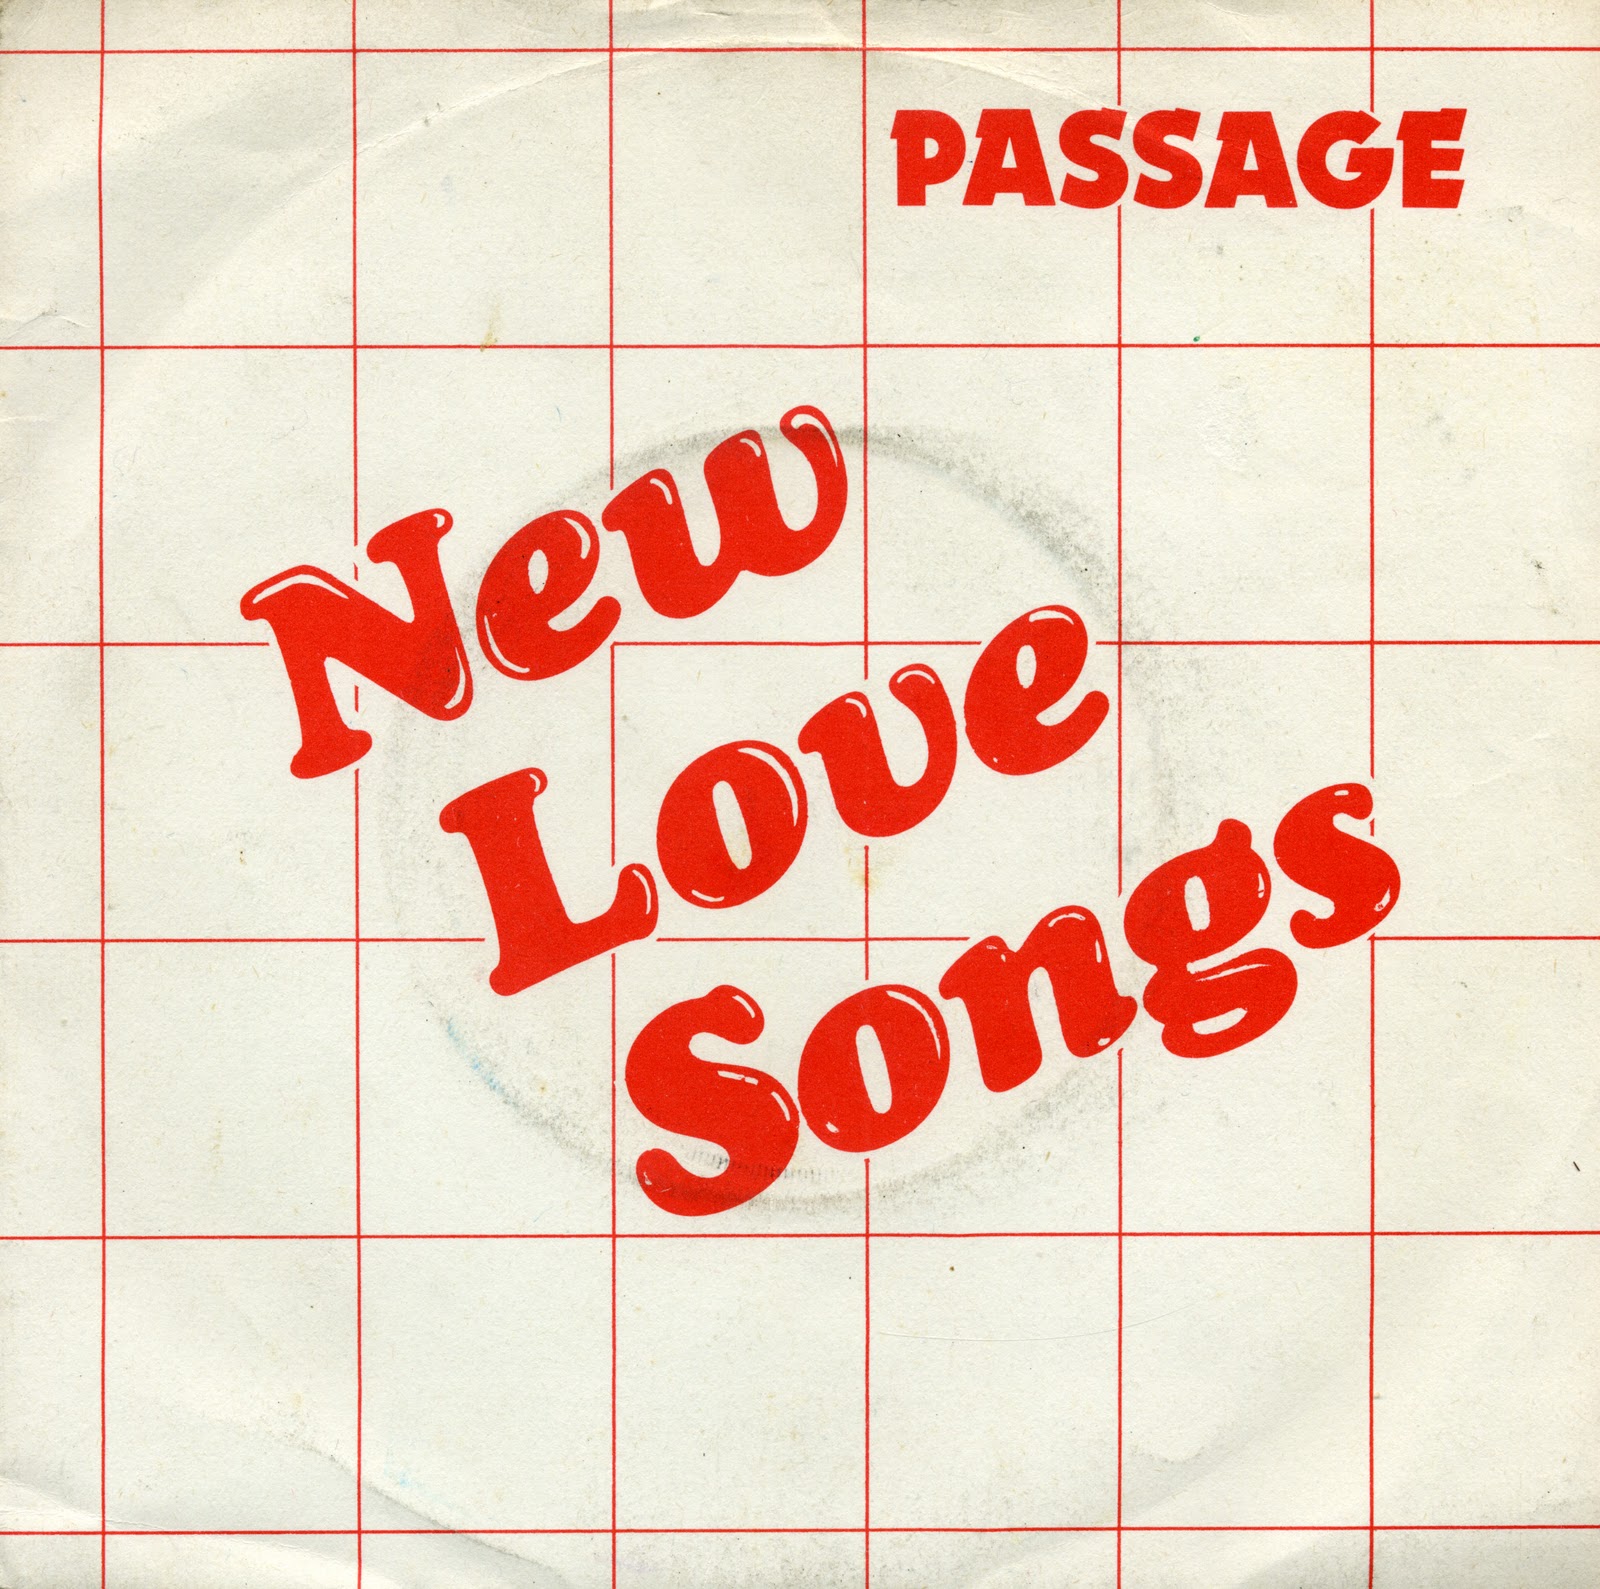 The Mangrove Delta Plan Collapsed: Passage - New Love Songs [E.P.] (1978)